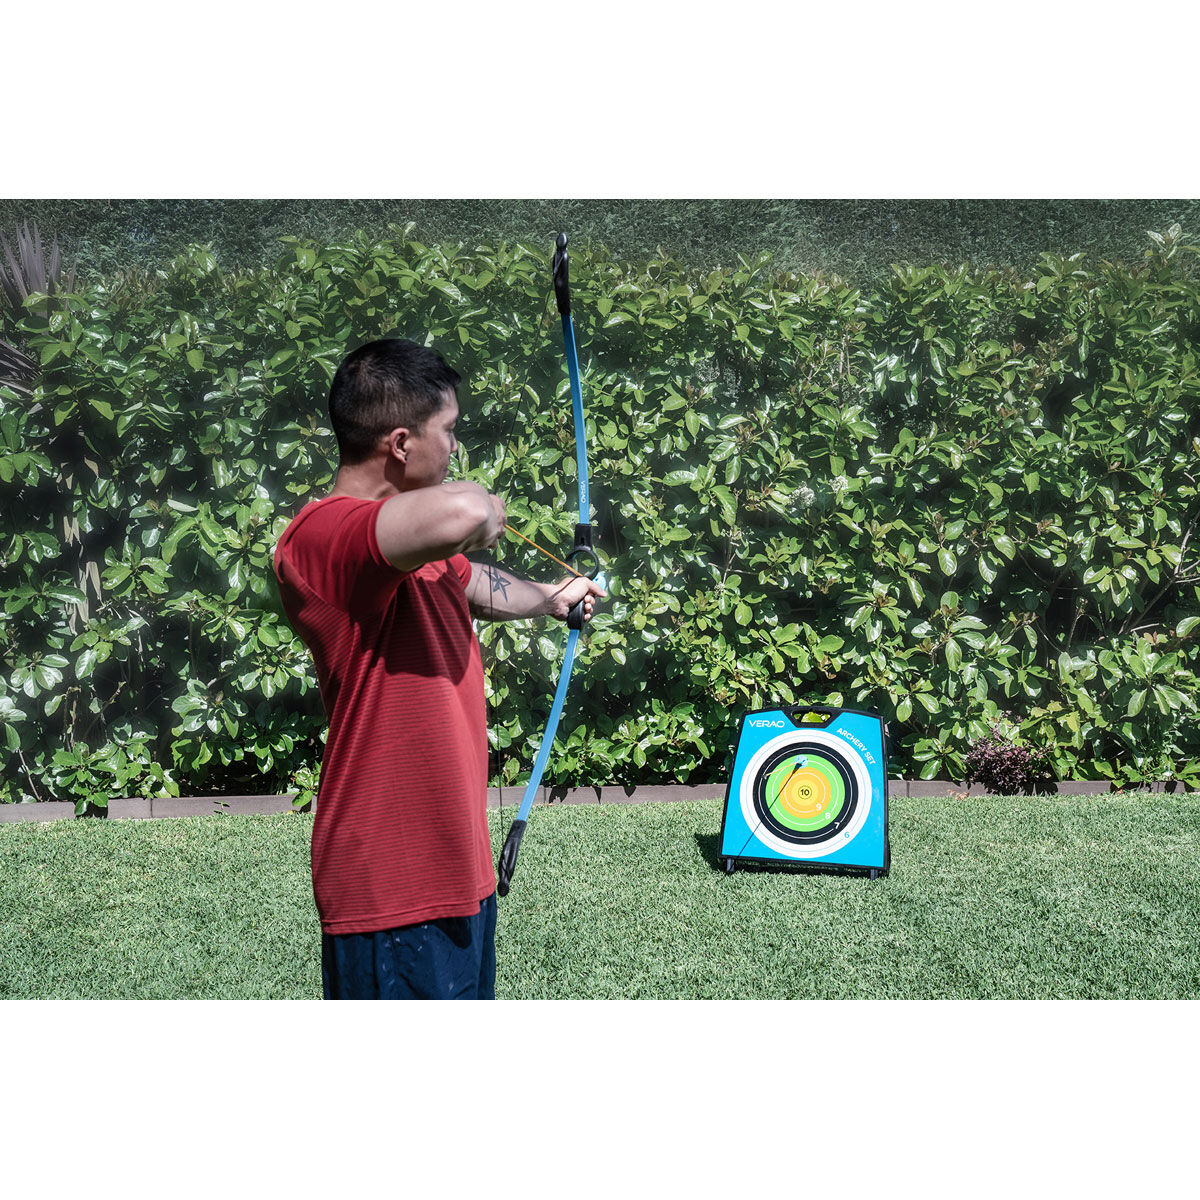 Includes Arrows Target and Quiver CHIMAERA Bow & Arrow Archery Set for Kids 